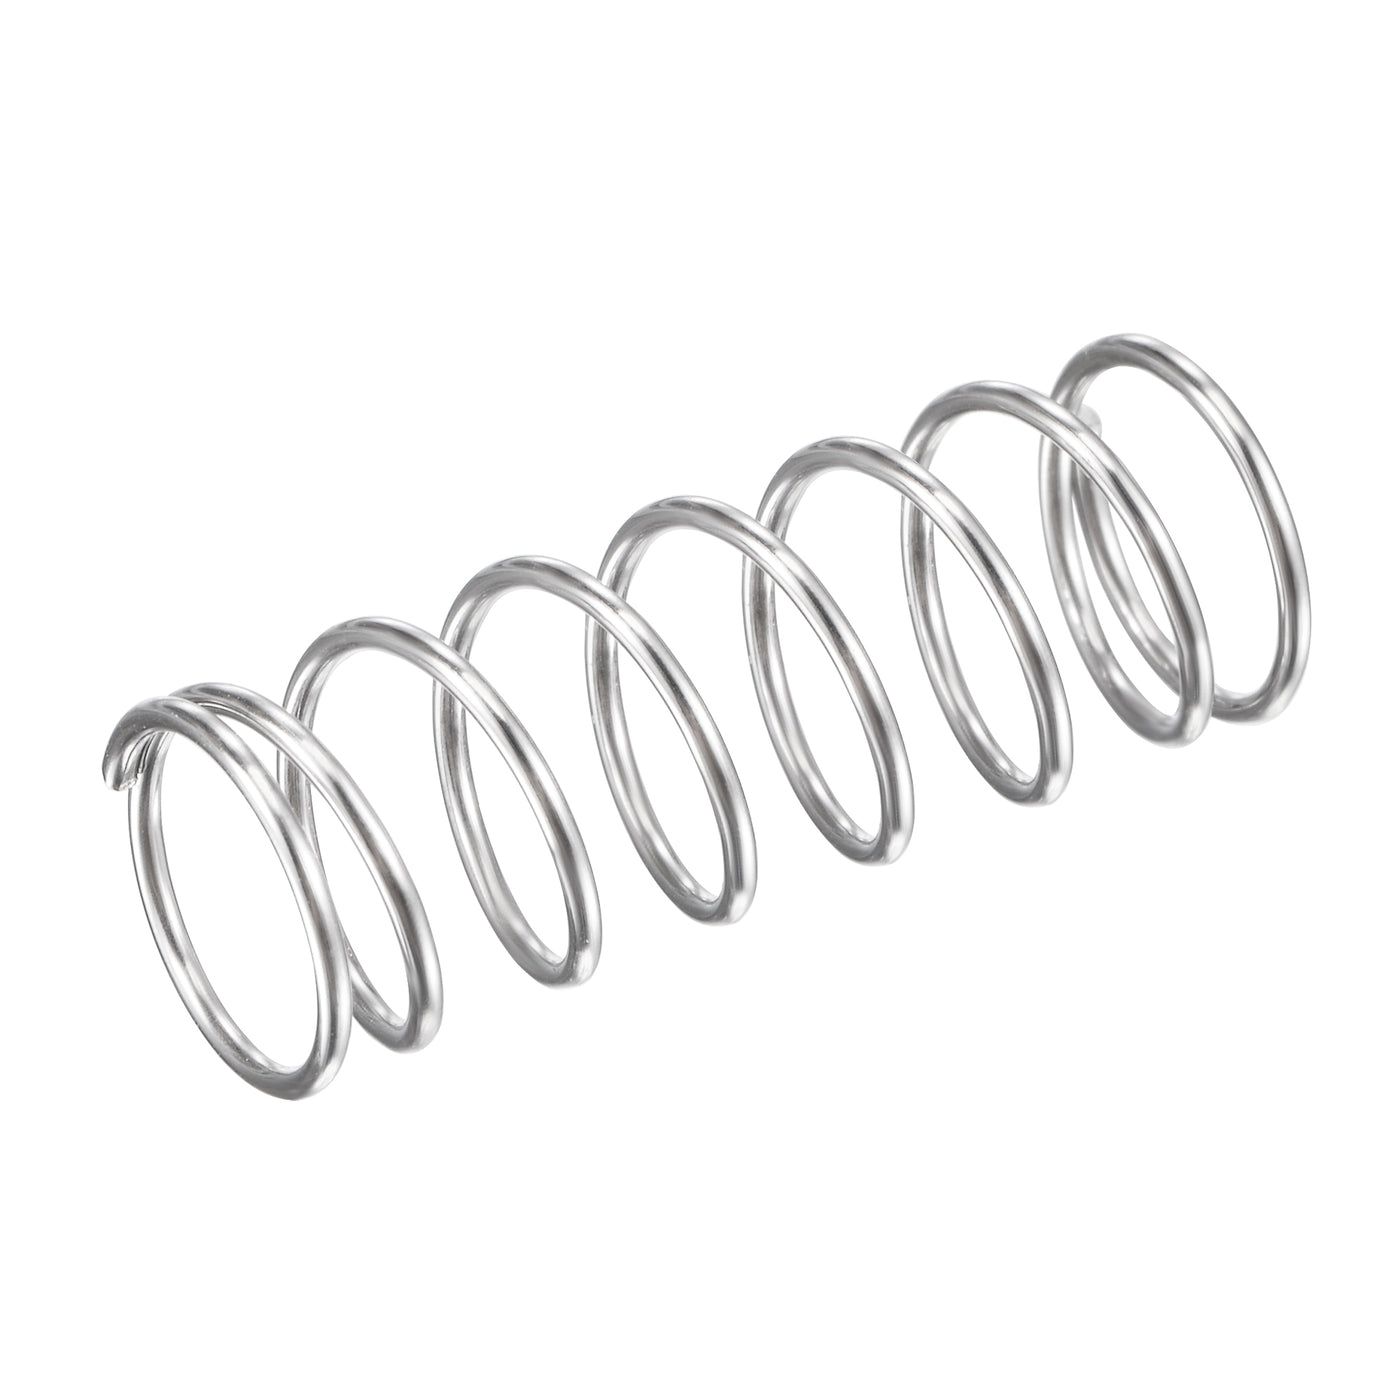 uxcell Uxcell 11mmx0.9mmx30mm 304 Stainless Steel Compression Spring 11N Load Capacity 20pcs